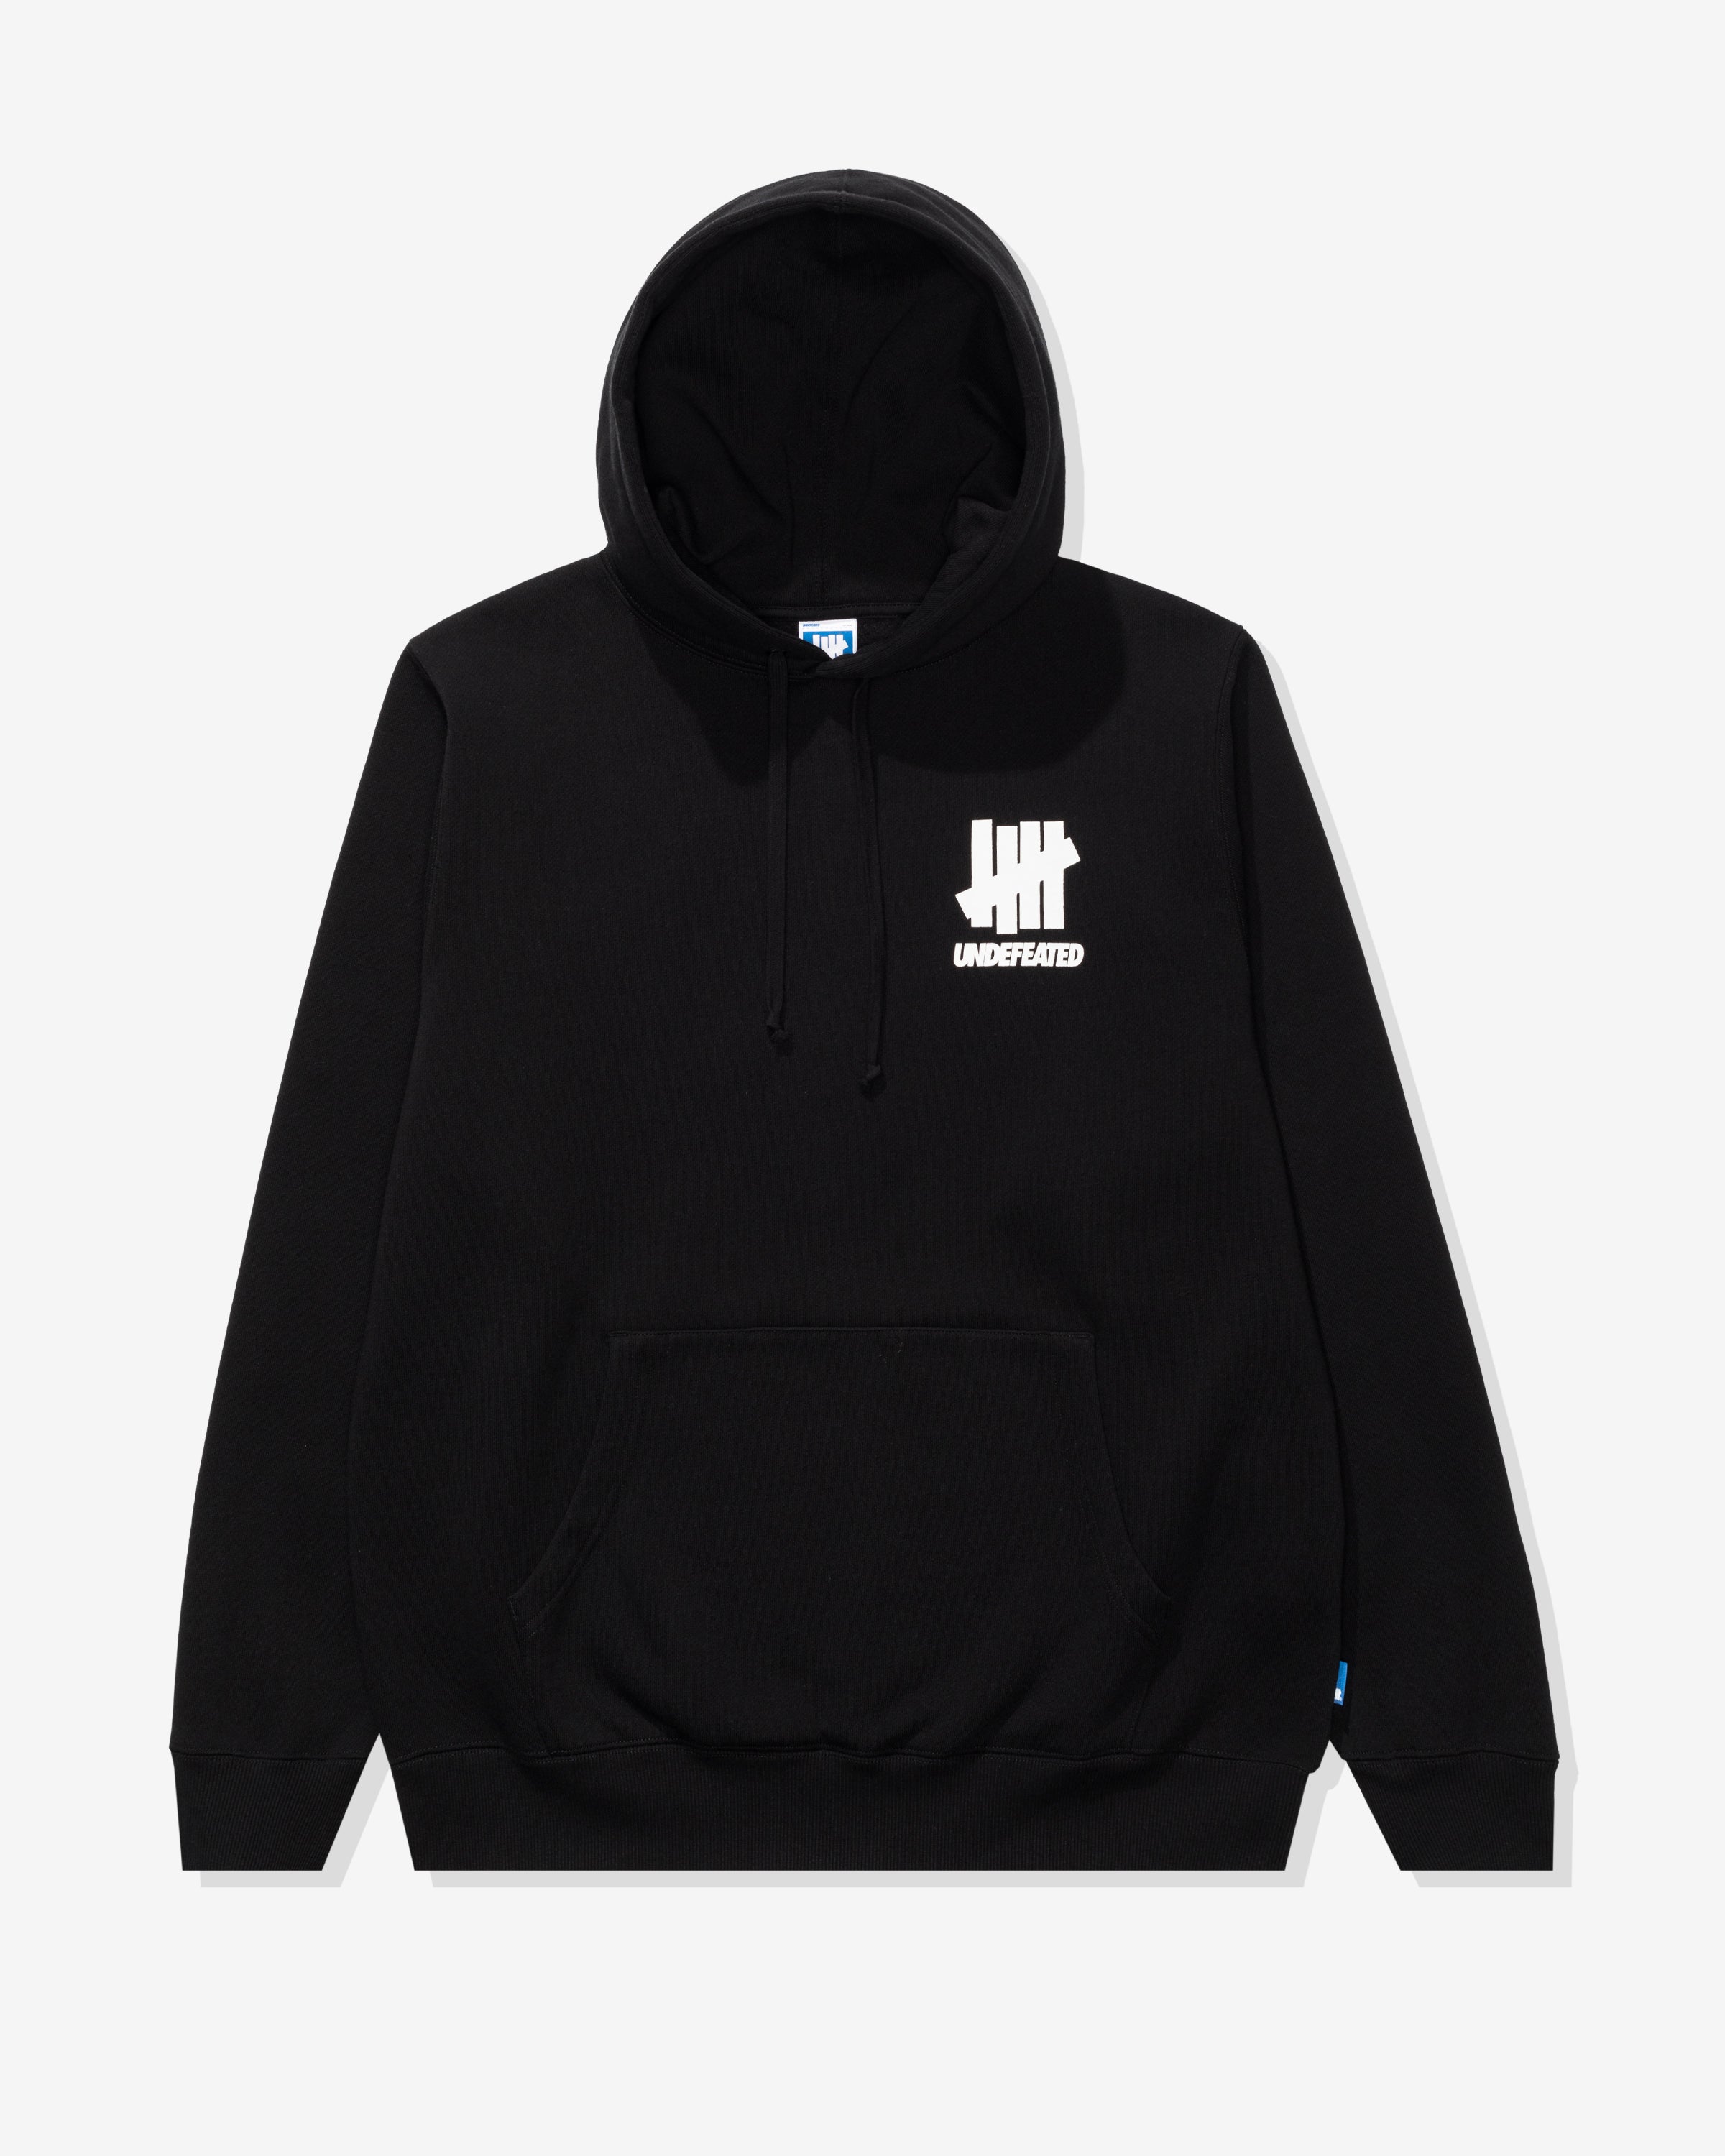 UNDEFEATED LOGO LOCKUP PULLOVER HOODIE